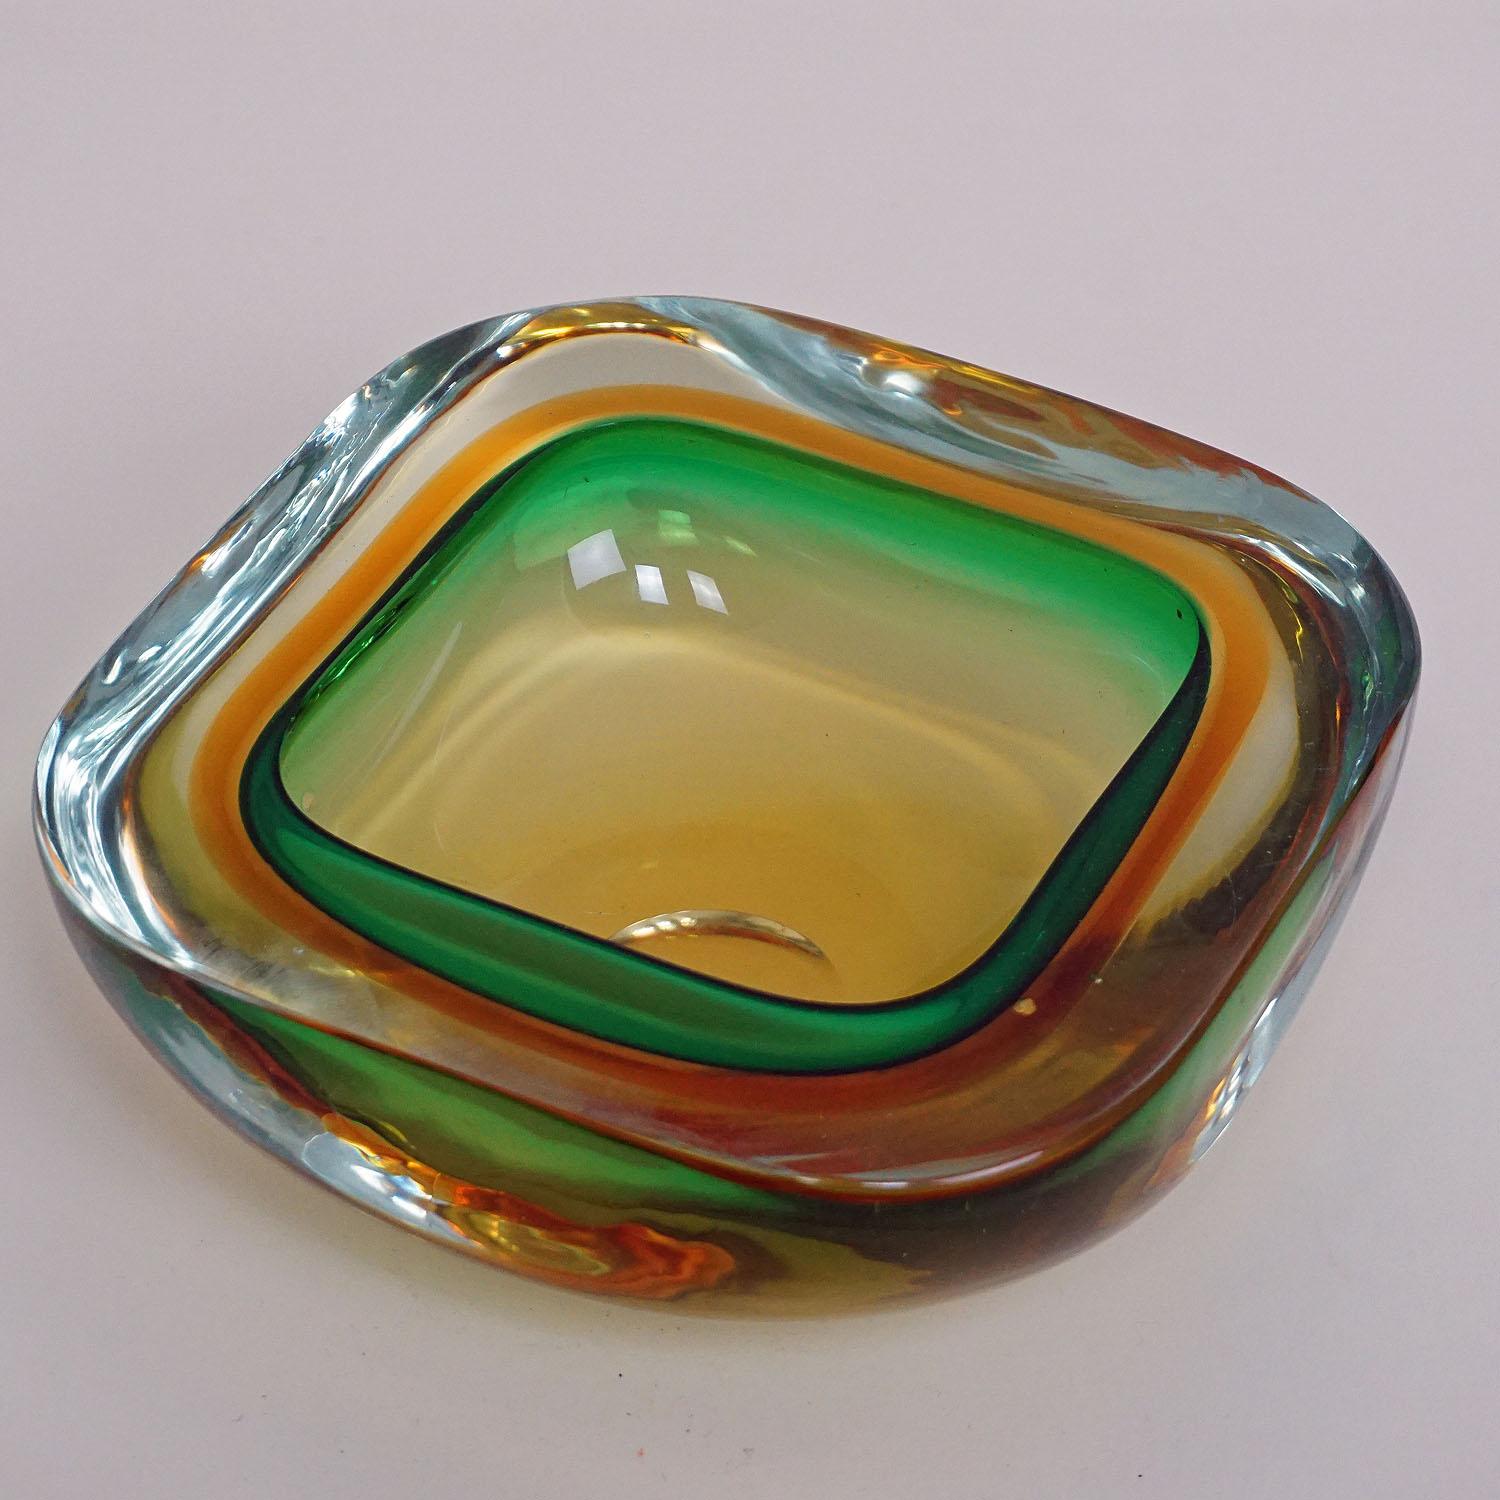 A heavy Sommerso glass bowl attributed to Vetreria Gino Cenedese, circa 1960s. Yellow, orange, green and clear glass.
Measures:
Width 6.61